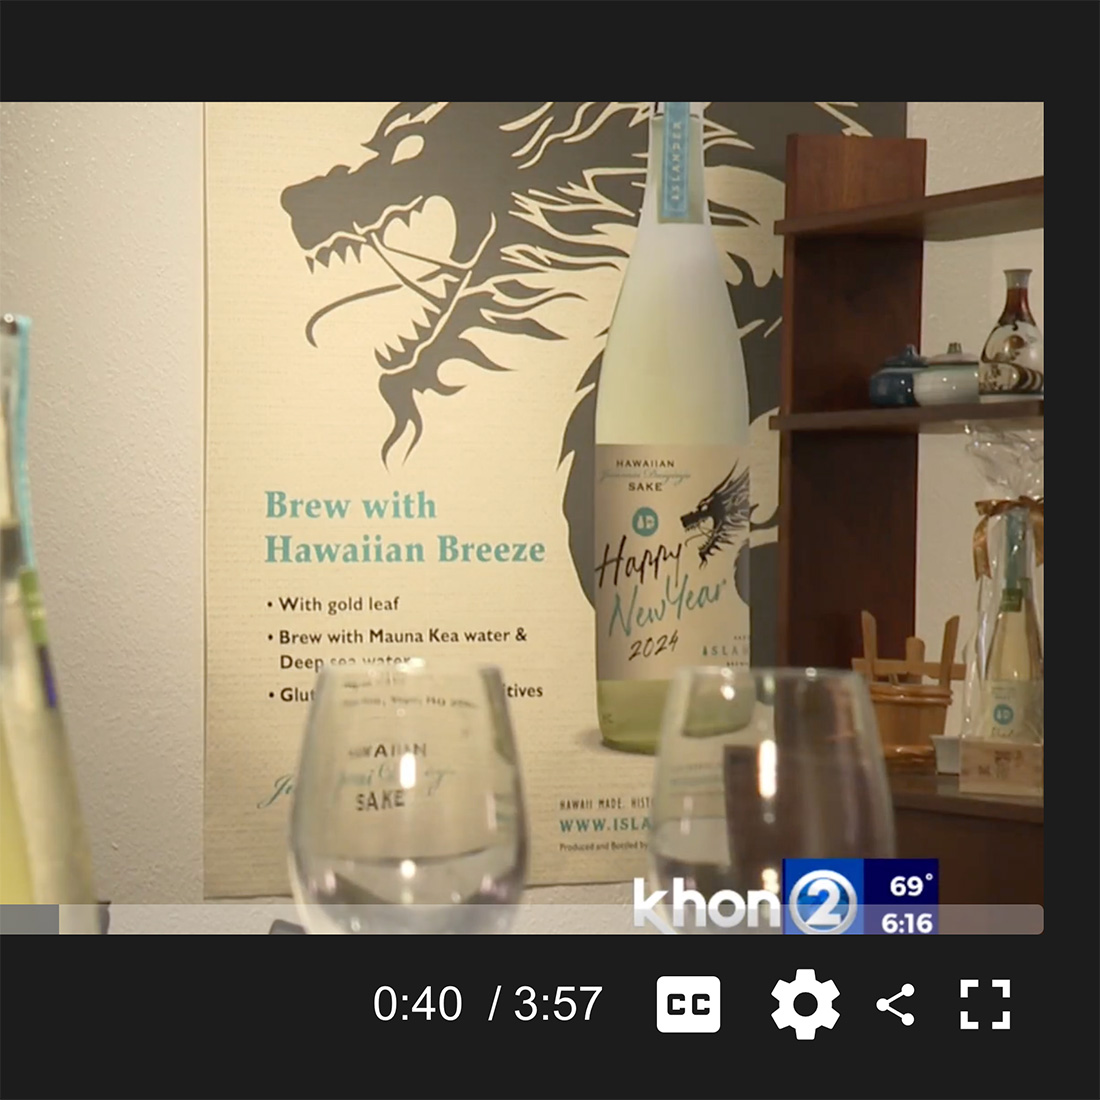 Local business is bringing a true taste of Japan with a distinct Hawaii flavor to Sake